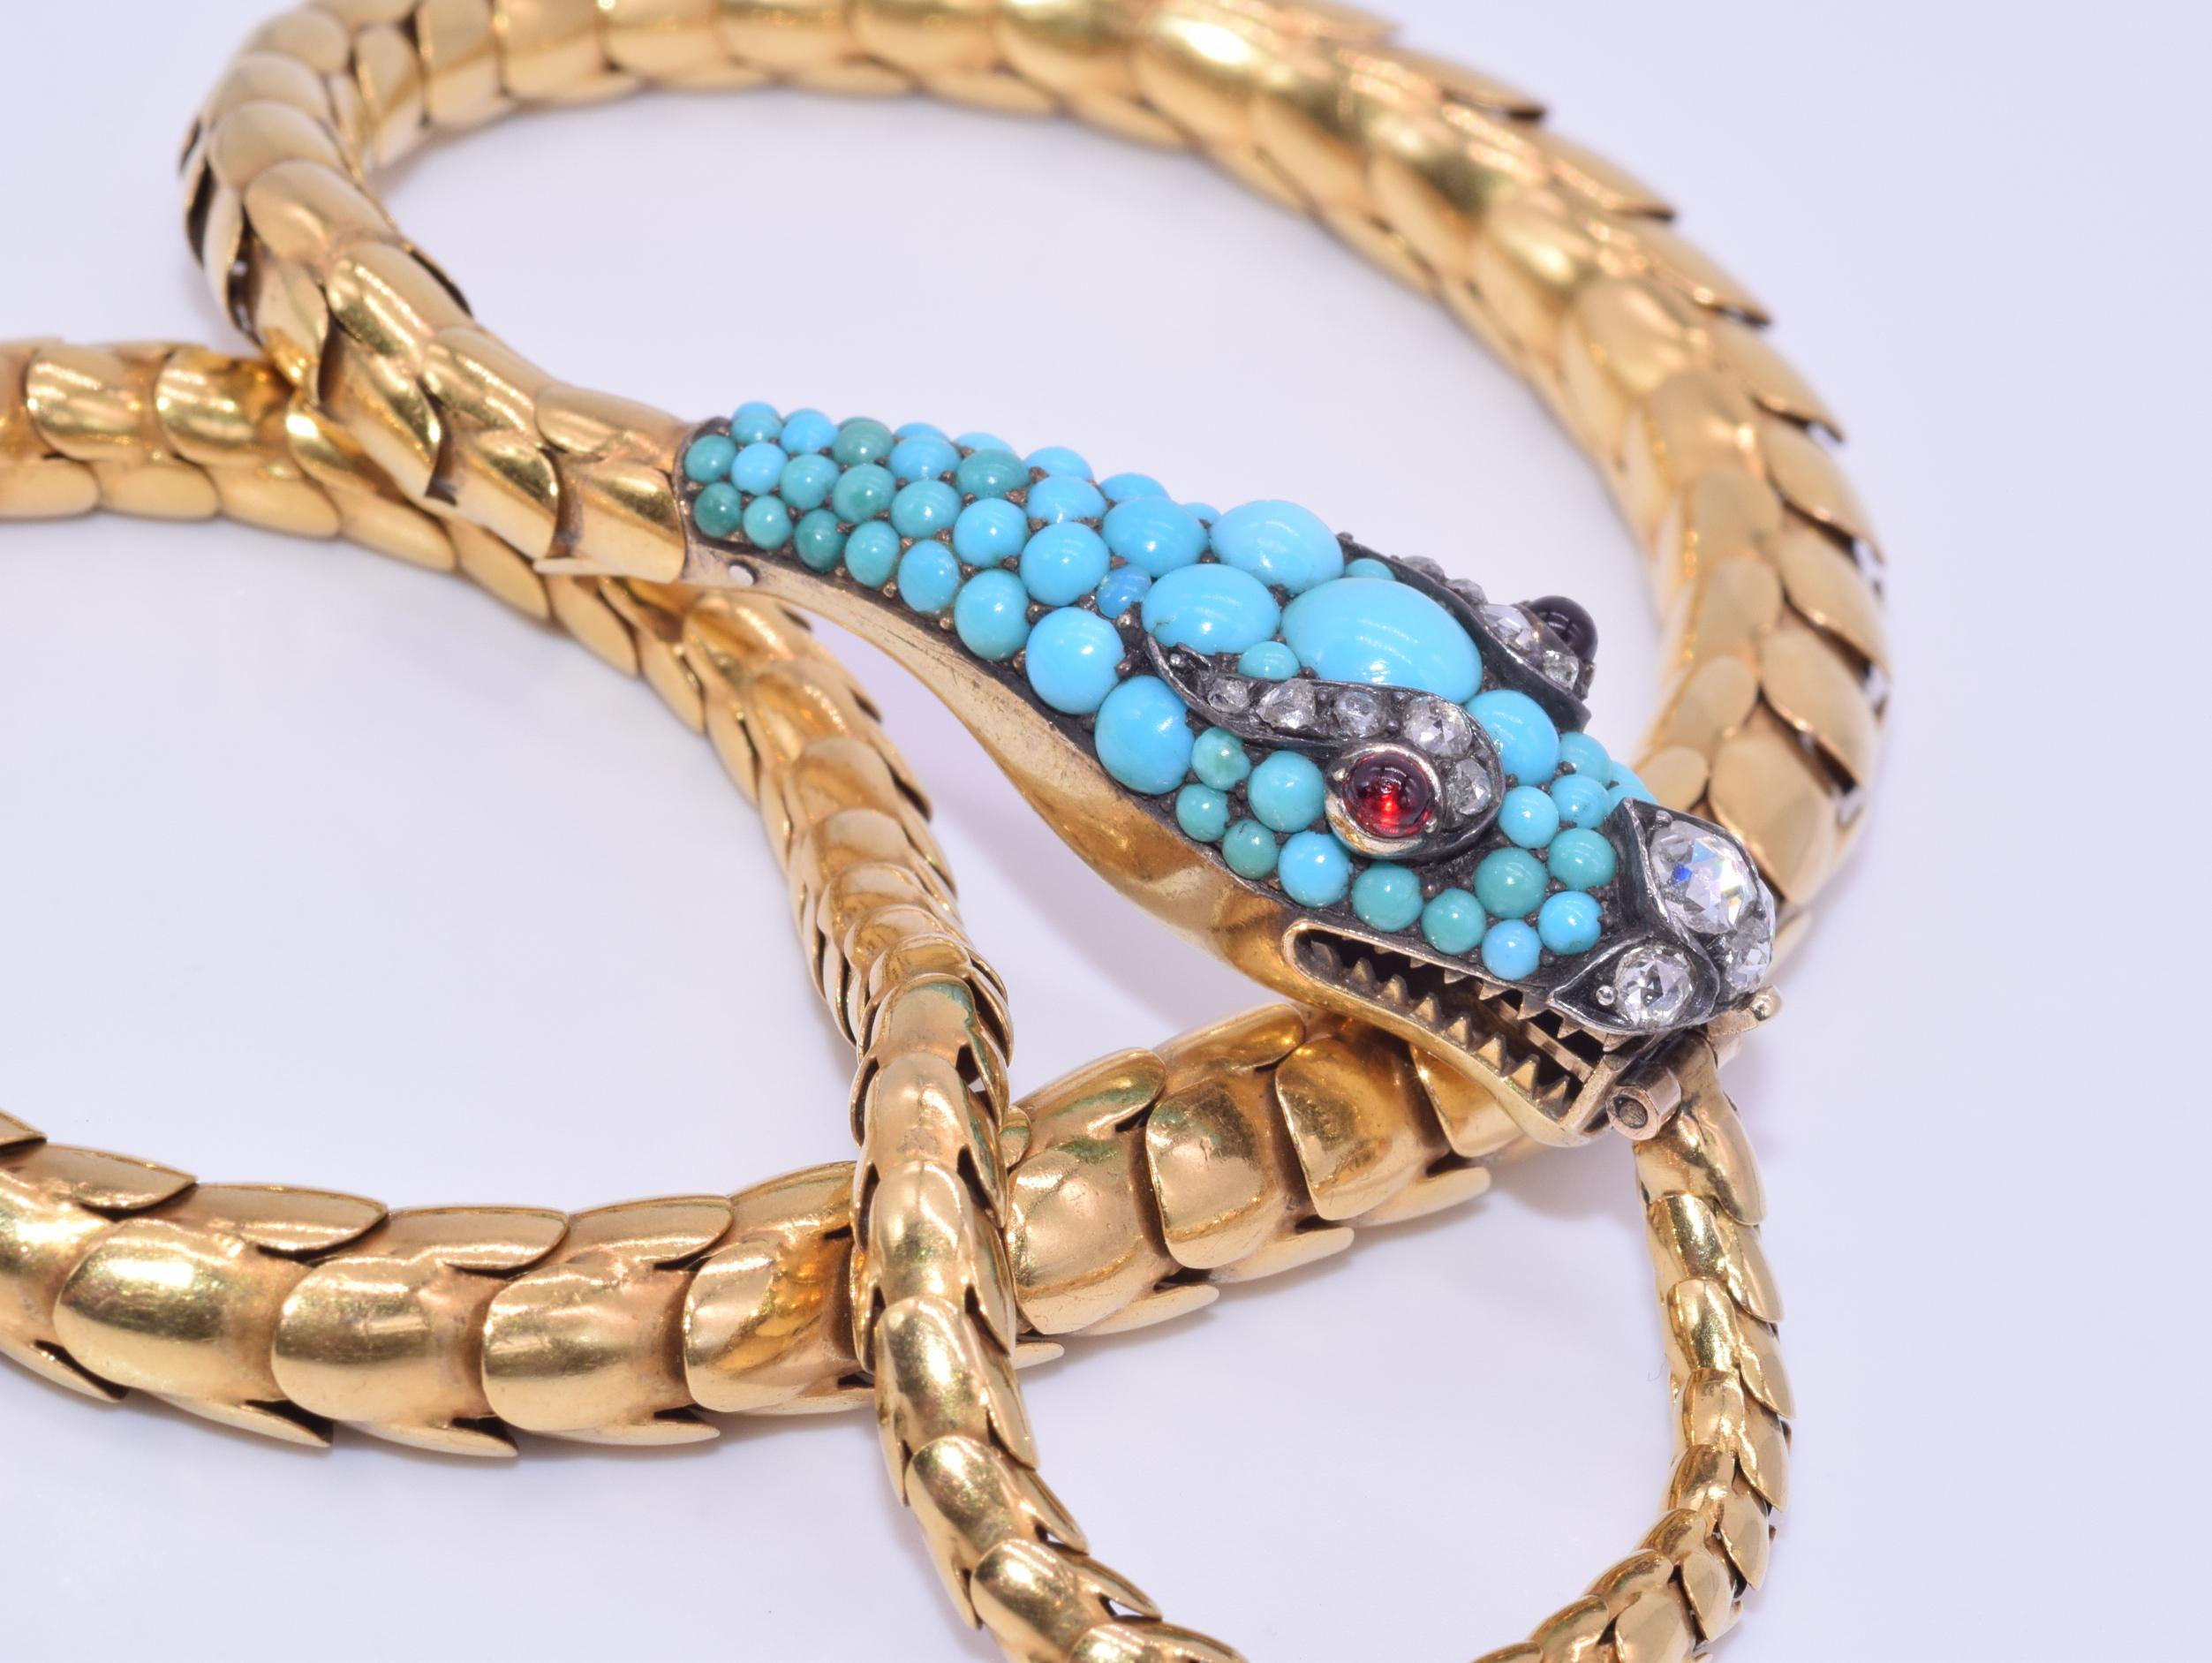 Convertible Antique Yellow Gold and Turquoise Snake Necklace

A snake necklace features a turquoise set head accented with rose cut diamonds totaling approximately 0.55 carat with garnet eyes mounted in 18 karat yellow gold. Snake head: 1.5in